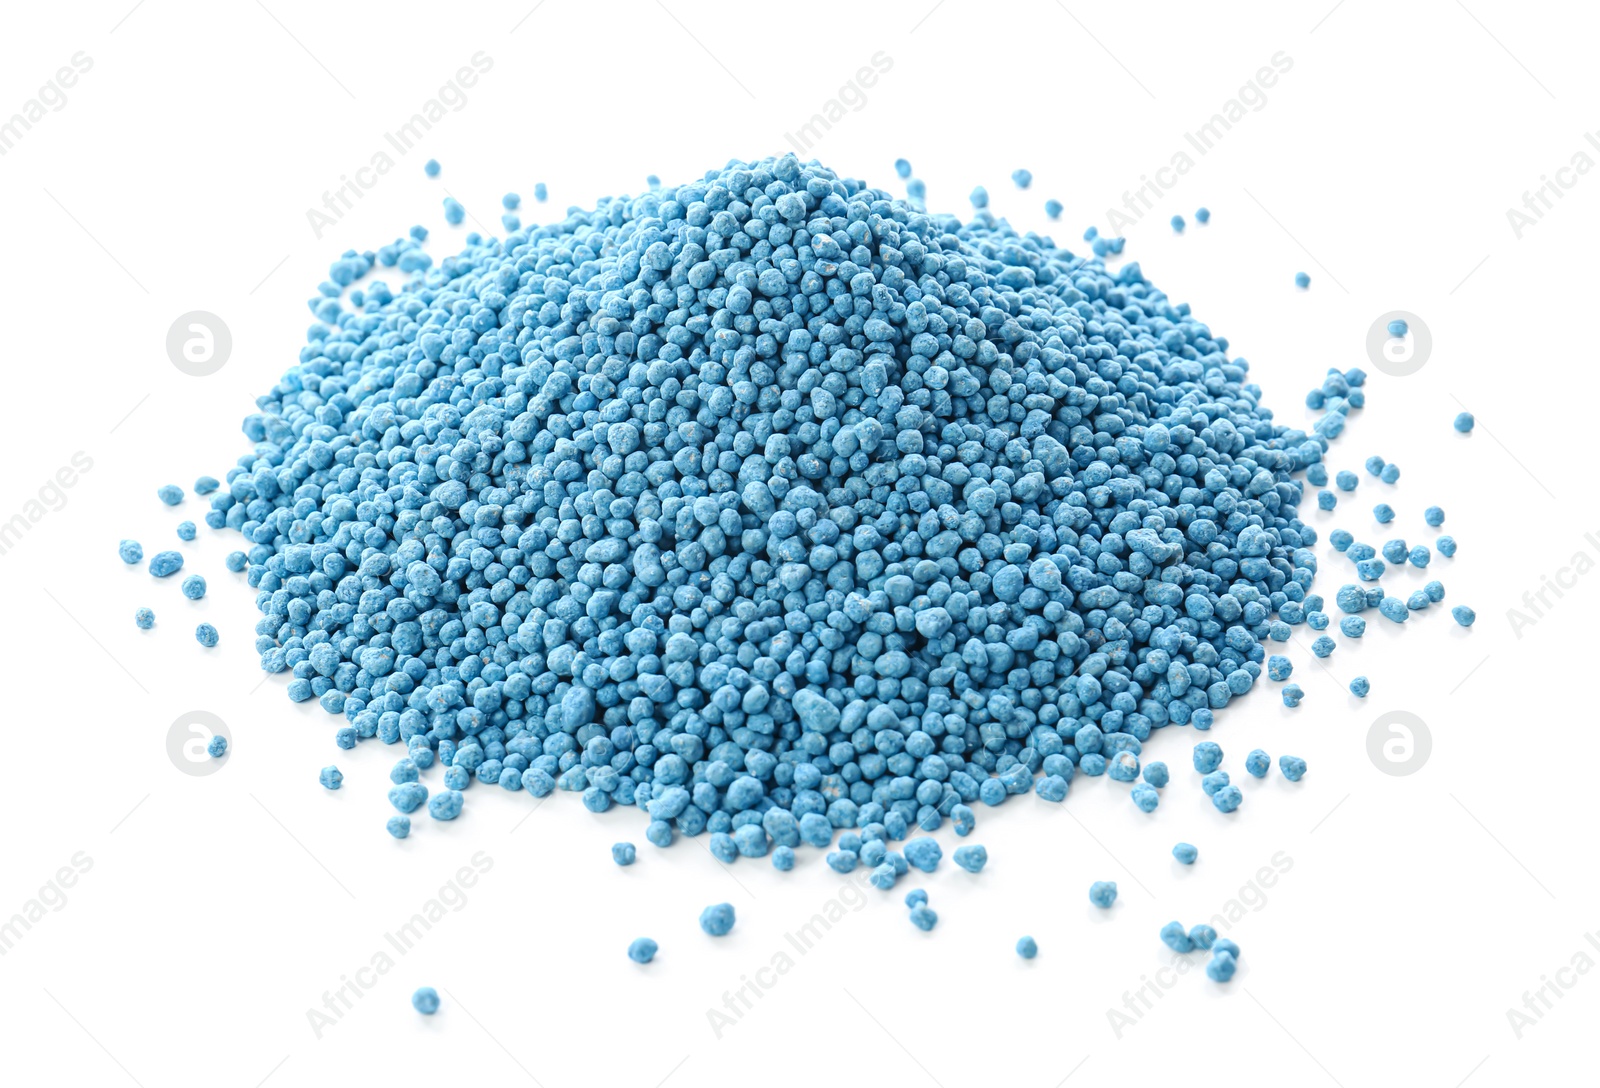 Photo of Pile of granular mineral fertilizer isolated on white